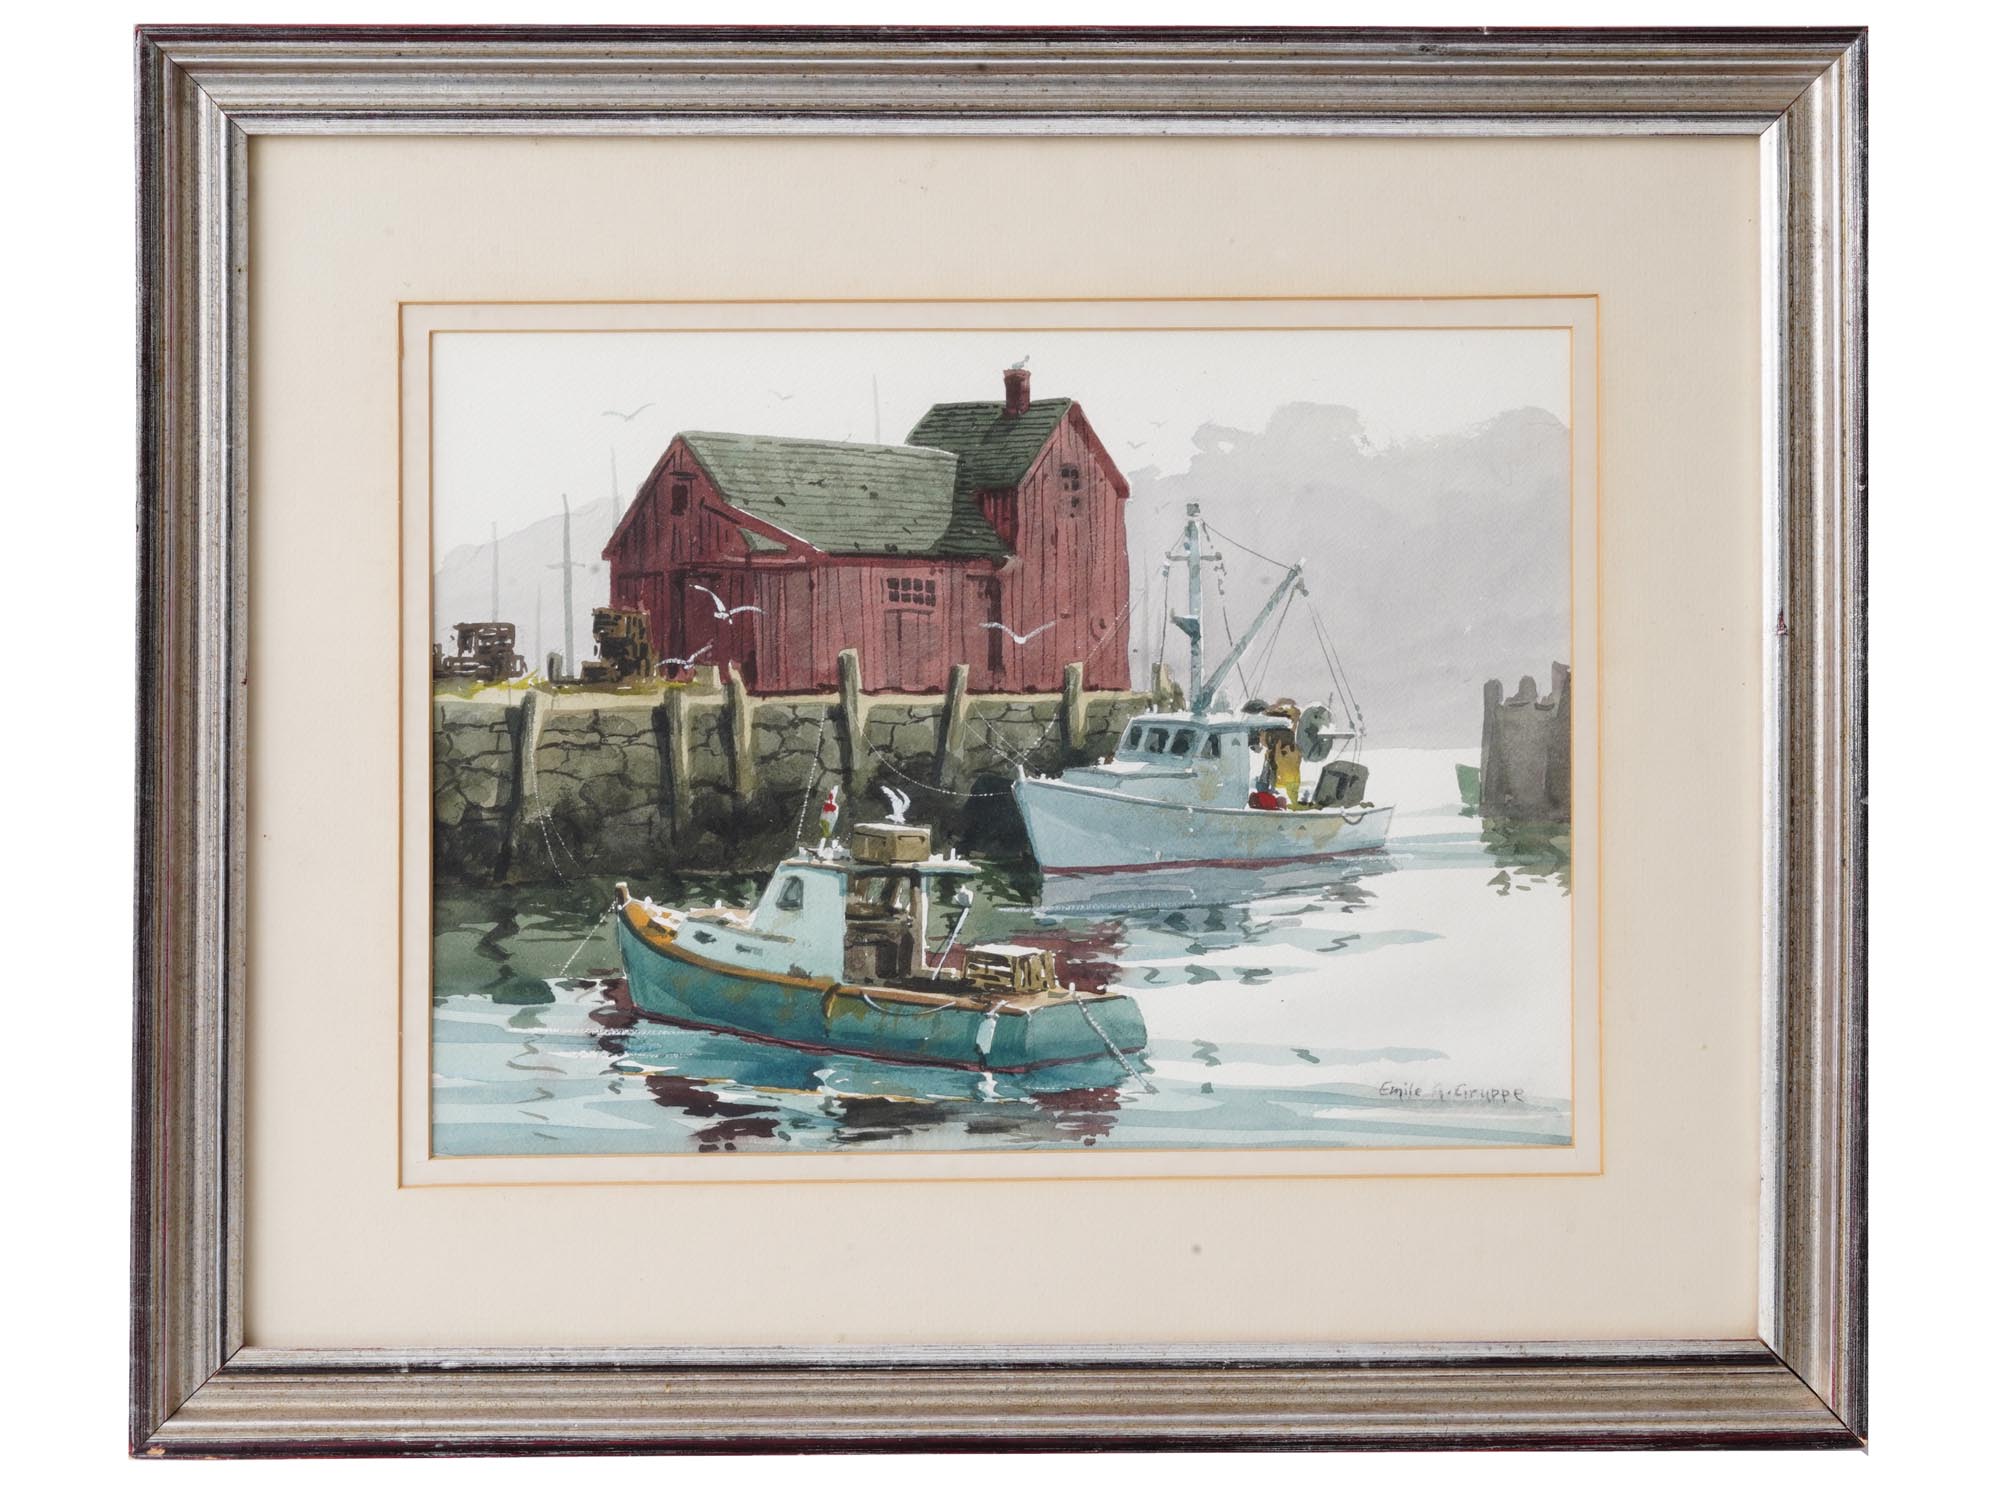 AMERICAN PORT WATERCOLOR PAINTING BY EMILE GRUPPE PIC-0